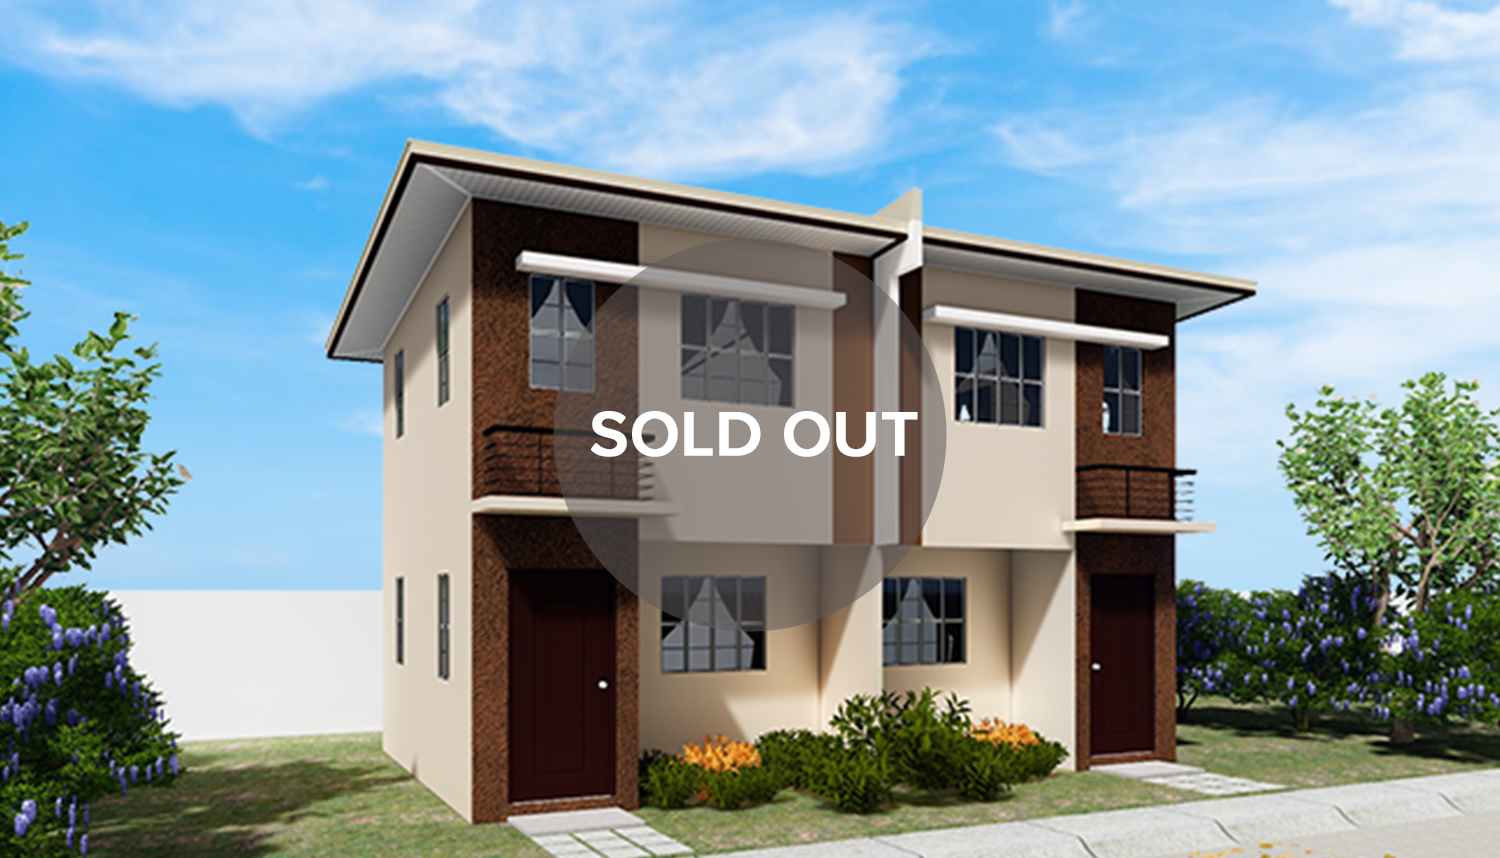 armina duplex artist perspective 2 sold out | Affordable House and Lot For Sale In The Philippines